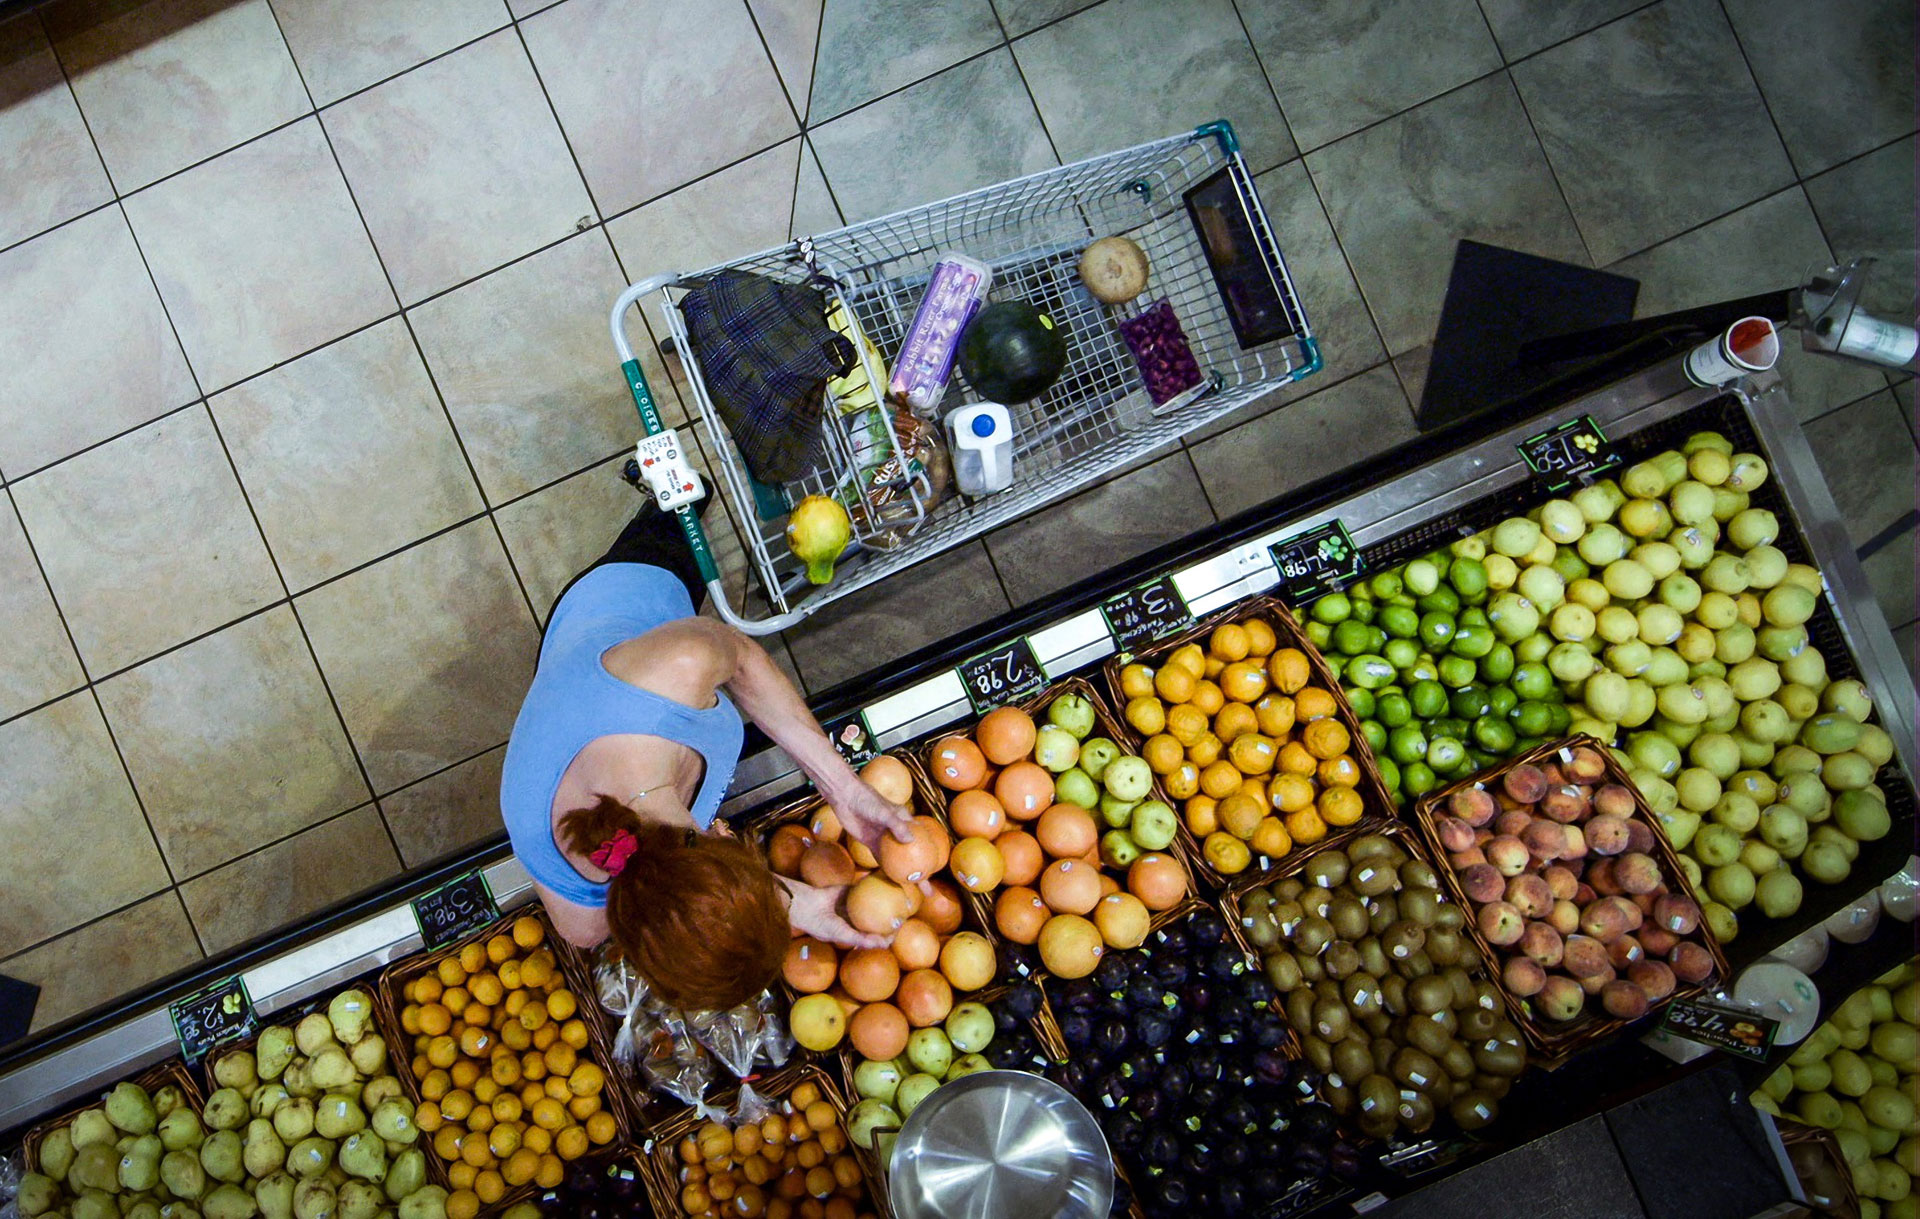 A grocery shopper picks through fruit in the produce section. Most fruits and vegetables are culled due to aesthetic issues rather than safety concerns.